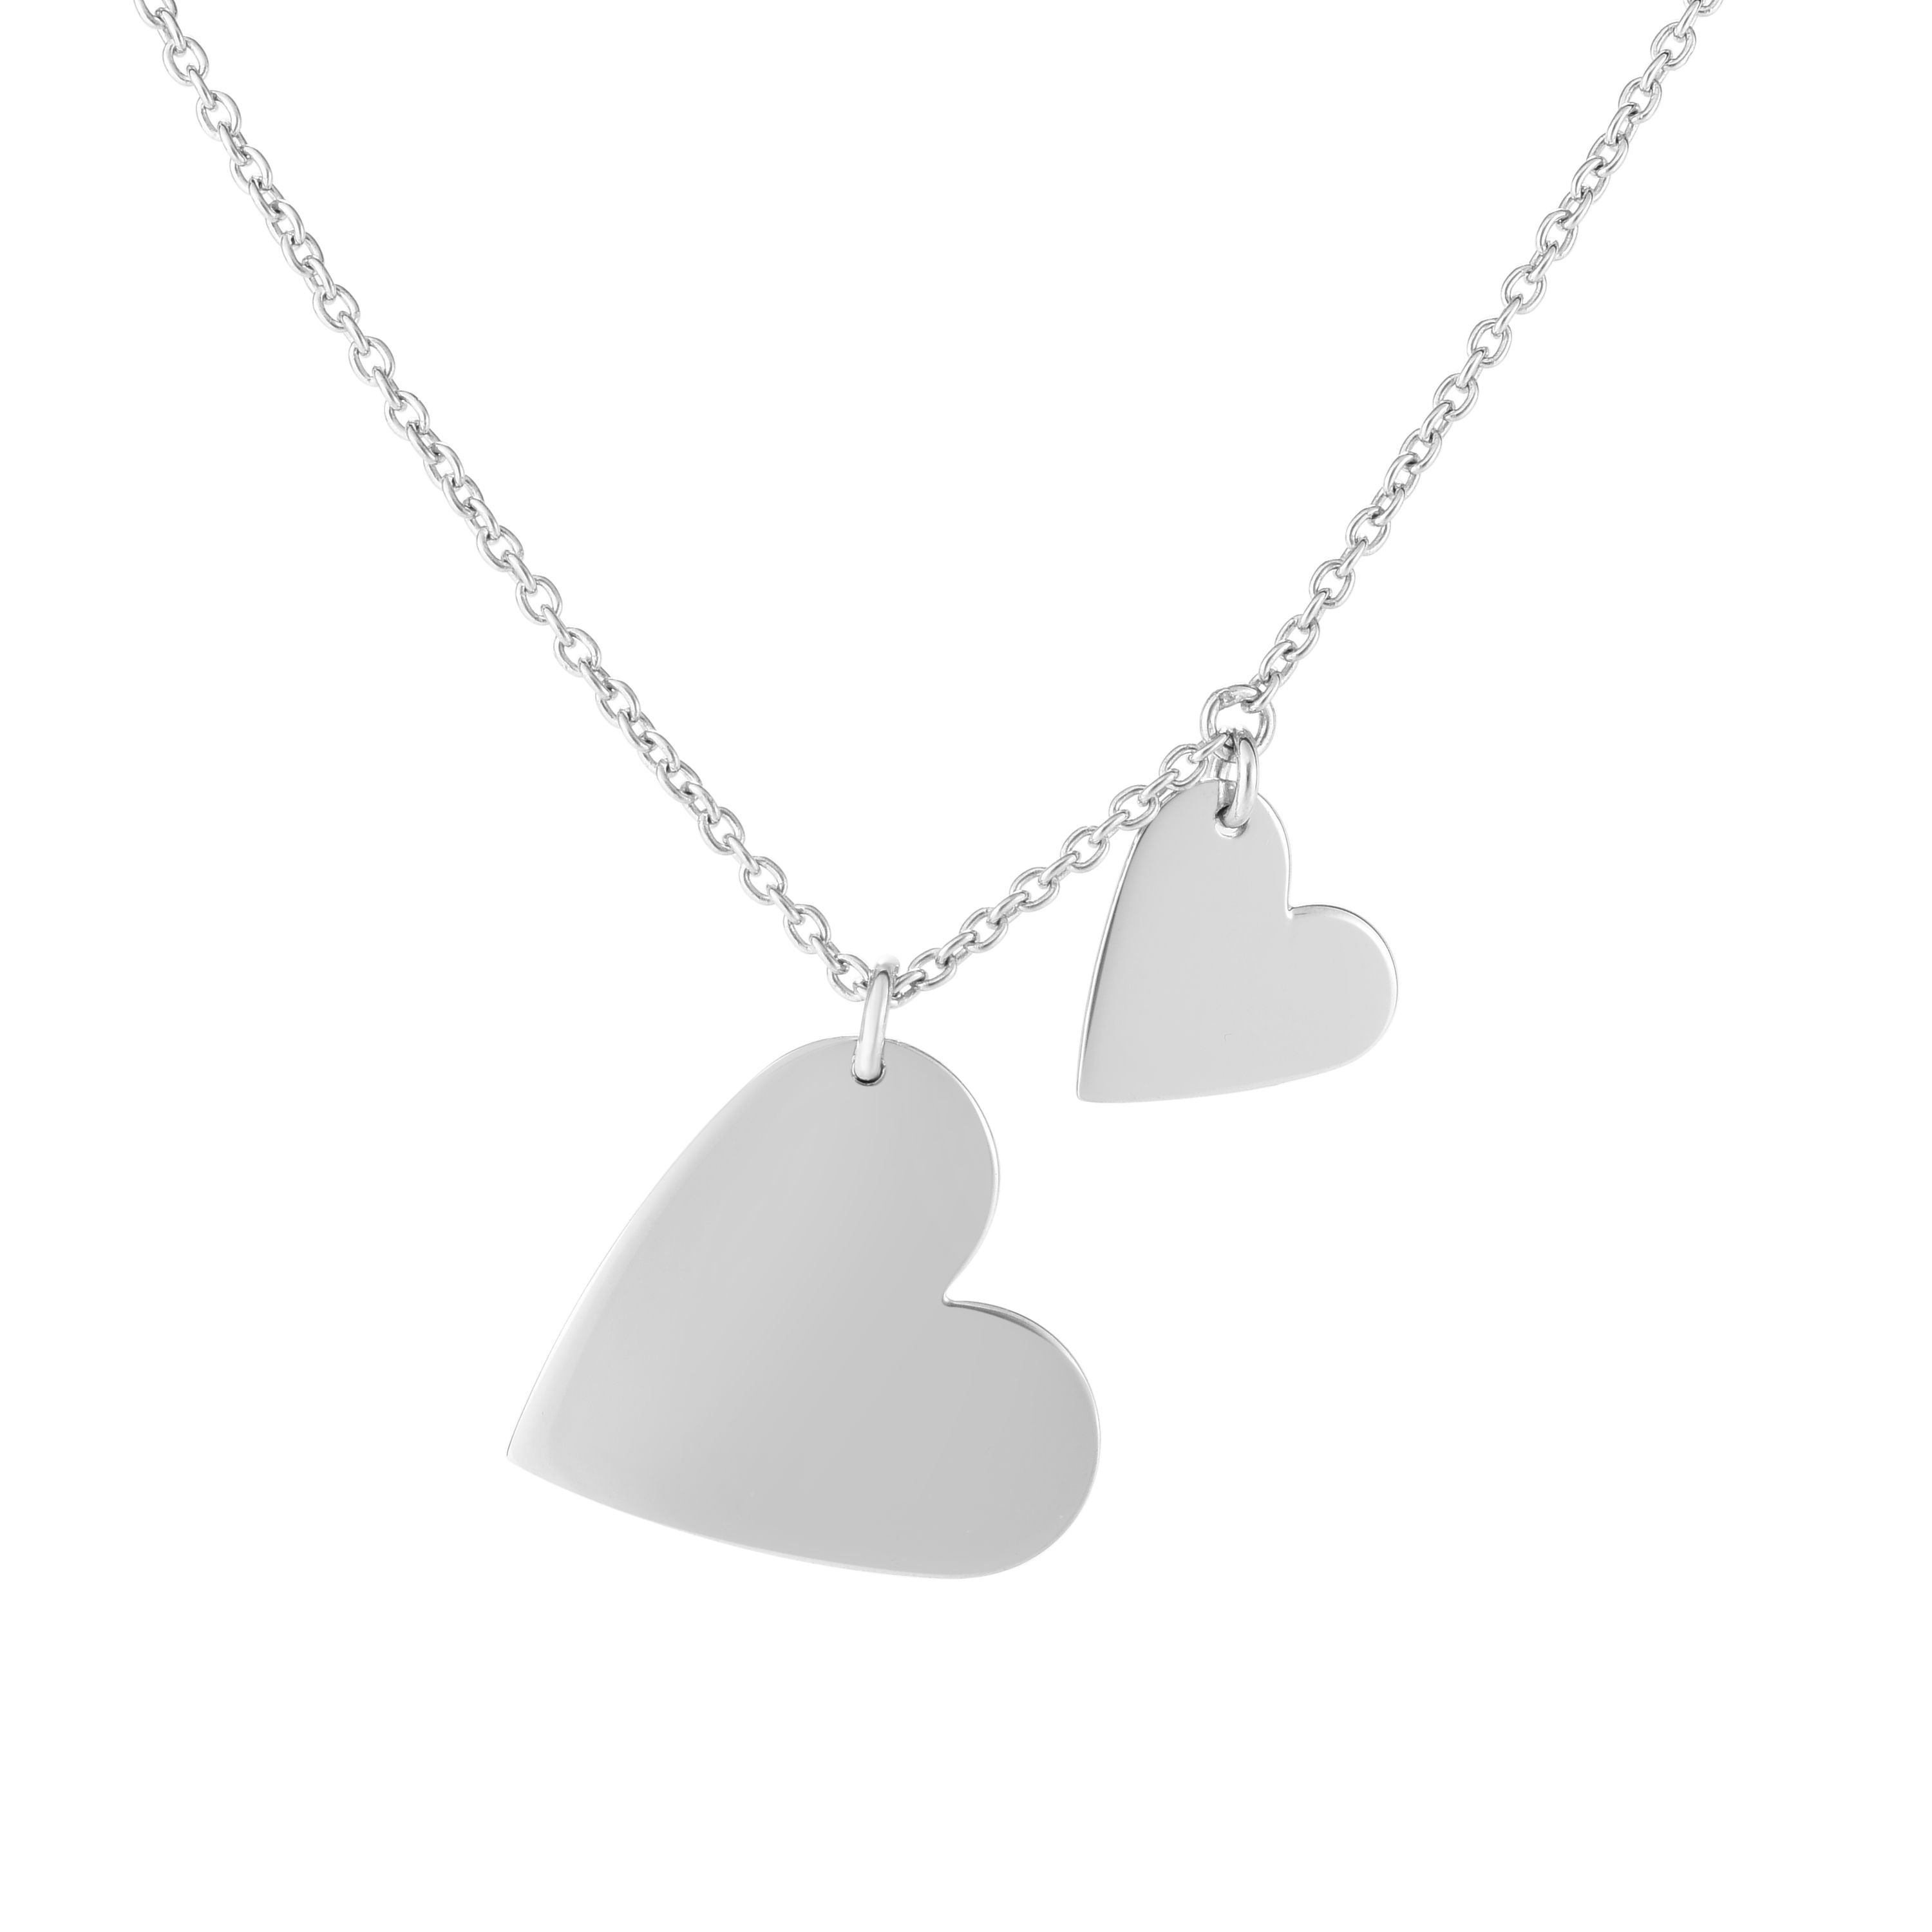 Sterling Silver Heart Charms Necklace, 18" fine designer jewelry for men and women